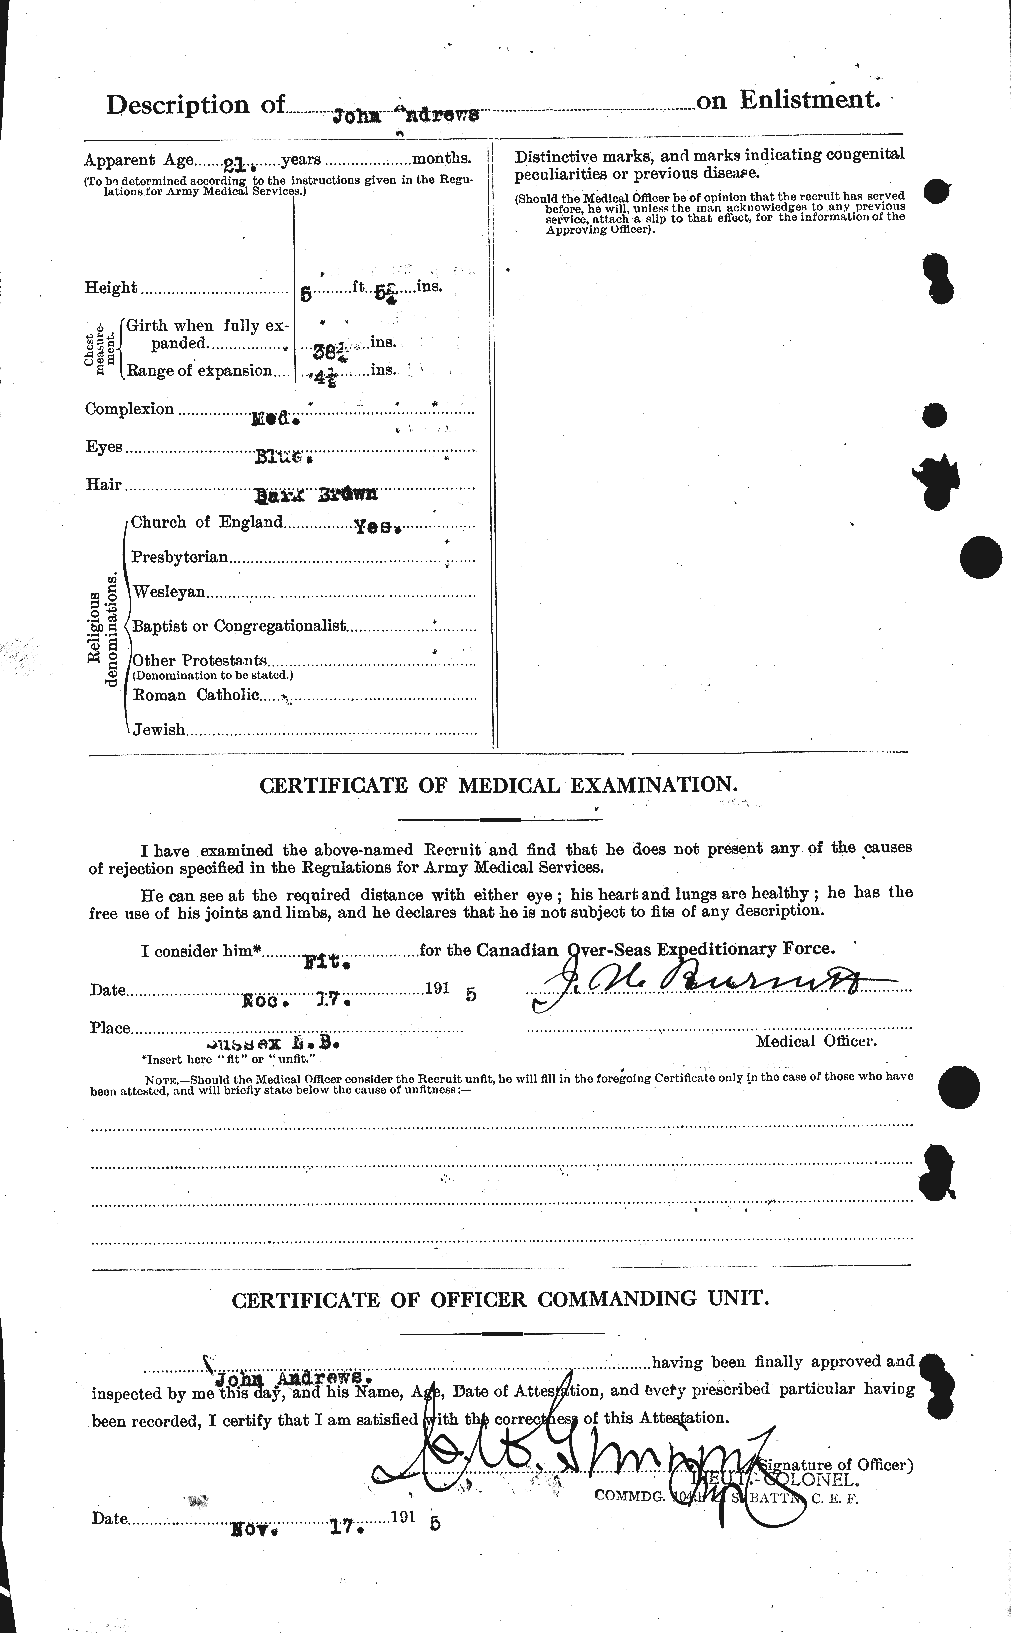 Personnel Records of the First World War - CEF 210211b